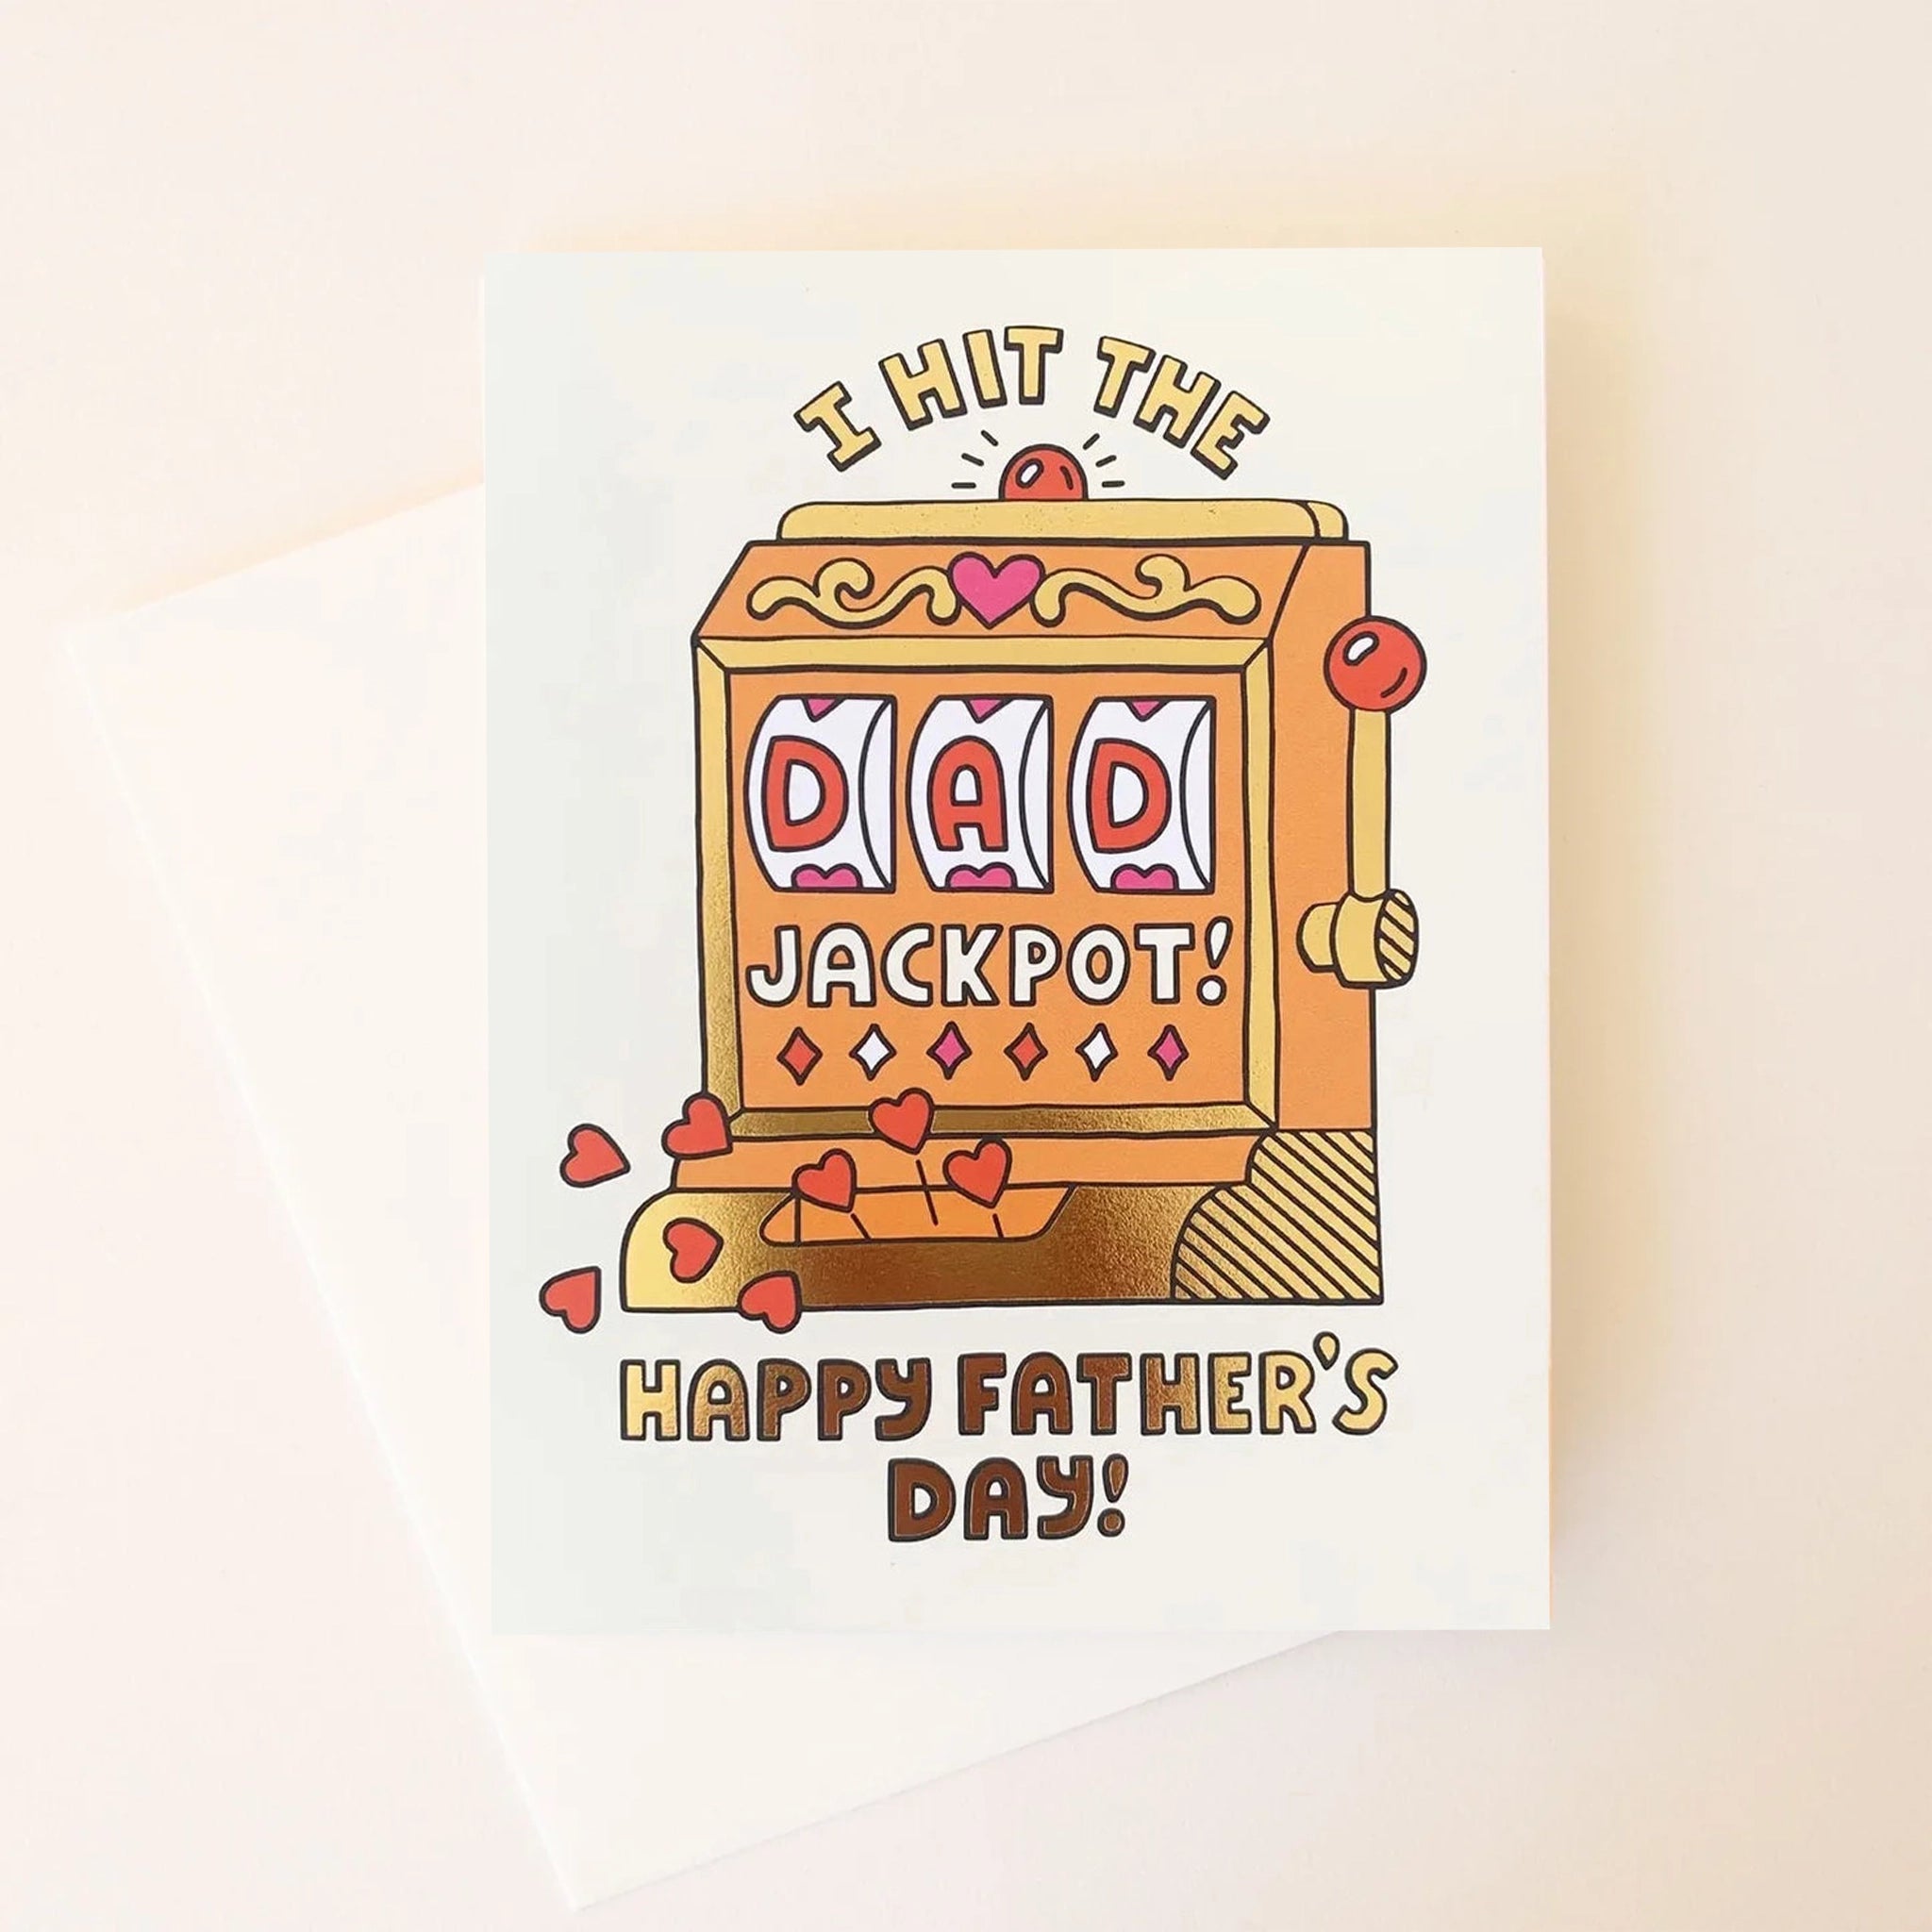 On a cream background is a white card with an orange and gold slot machine that&#39;s detailed with hearts and reads, &quot;I hit the DAD jackpot! Happy Father&#39;s Day!&quot;. &quot;DAD&quot; is written in the slot machine as the winning numbers. Also included is a coordinating white envelope.